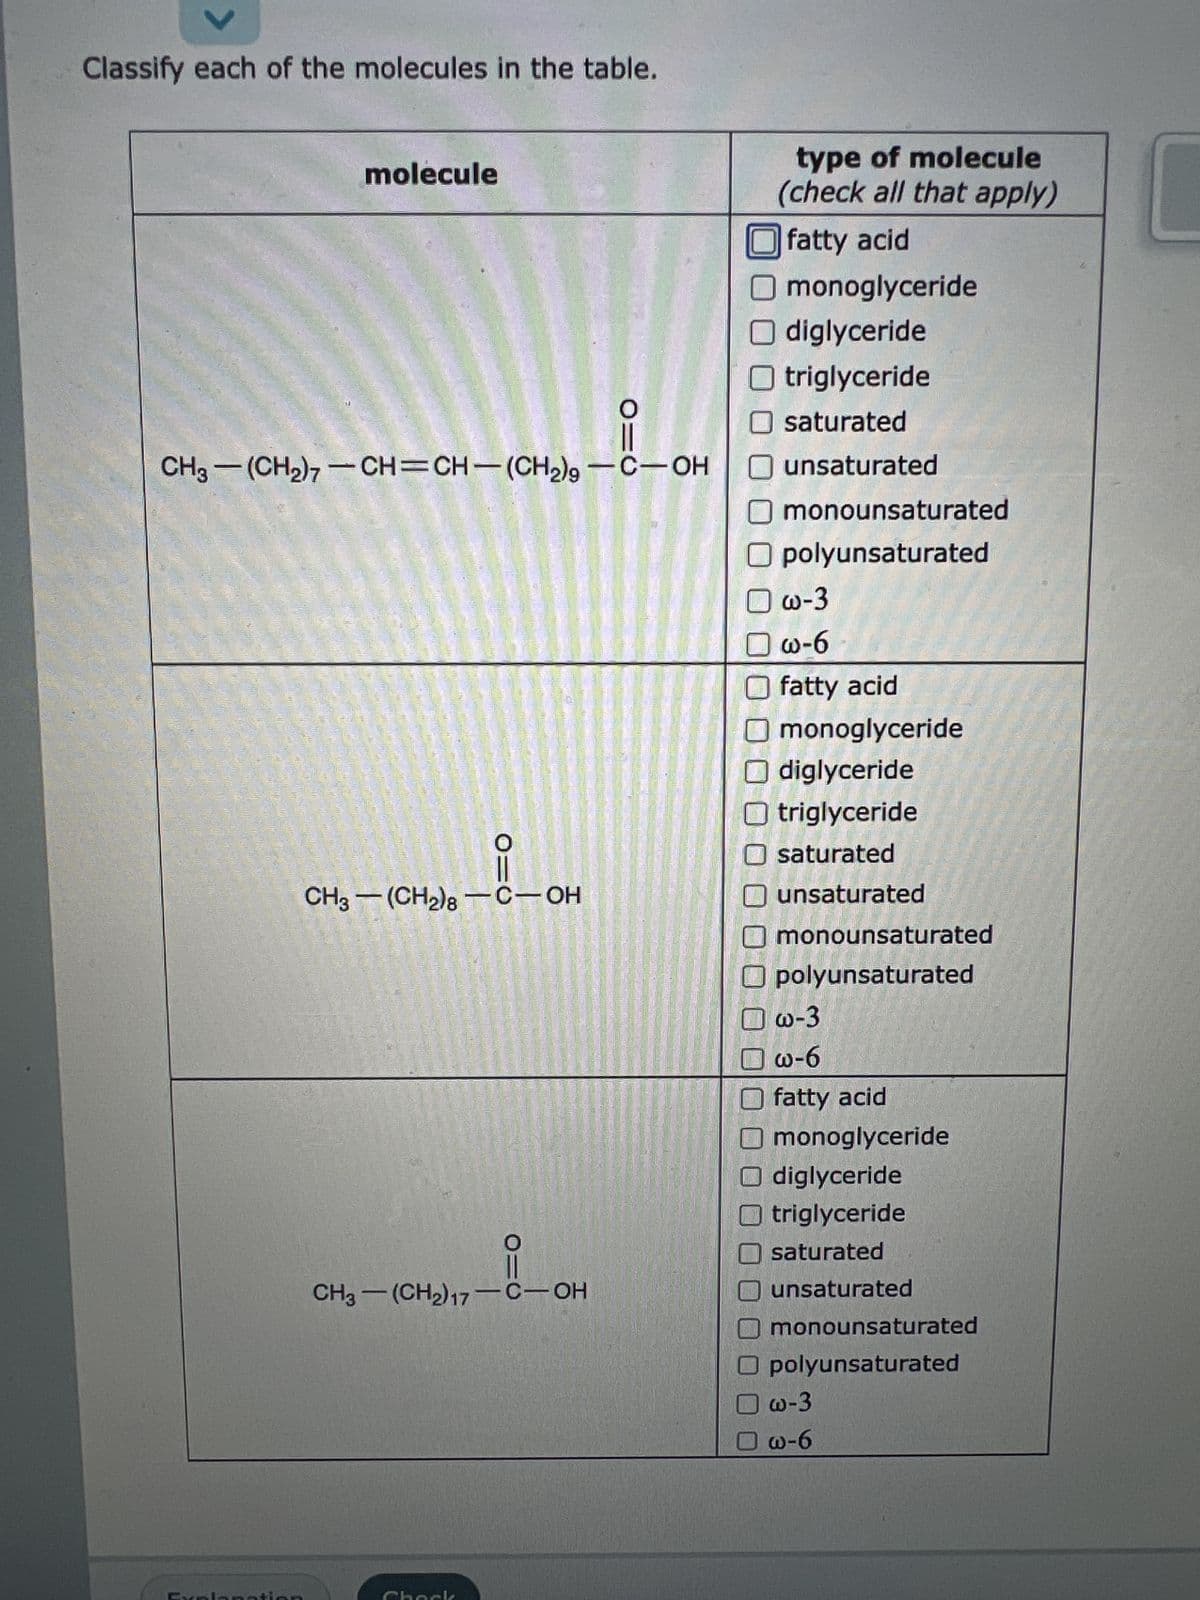 Classify each of the molecules in the table.
molecule
CH3-(CH₂)7-CH=CH-(CH₂)9 -C-OH
PORT
O=C
CH3-(CH₂)8-C-OH
010
1₁7-1-0
CH3-(CH2)17-C-OH
type of molecule
(check all that apply)
fatty acid
Omonoglyceride
O diglyceride
O triglyceride
O saturated
O unsaturated
O monounsaturated
O polyunsaturated
☐w-3
☐w-6
O fatty acid
monoglyceride
Odiglyceride
Otriglyceride
Osaturated
unsaturated
monounsaturated
polyunsaturated
w-3
w-6
fatty acid
monoglyceride
Odiglyceride
triglyceride
saturated
unsaturated
monounsaturated
O polyunsaturated
w-3
☐w-6